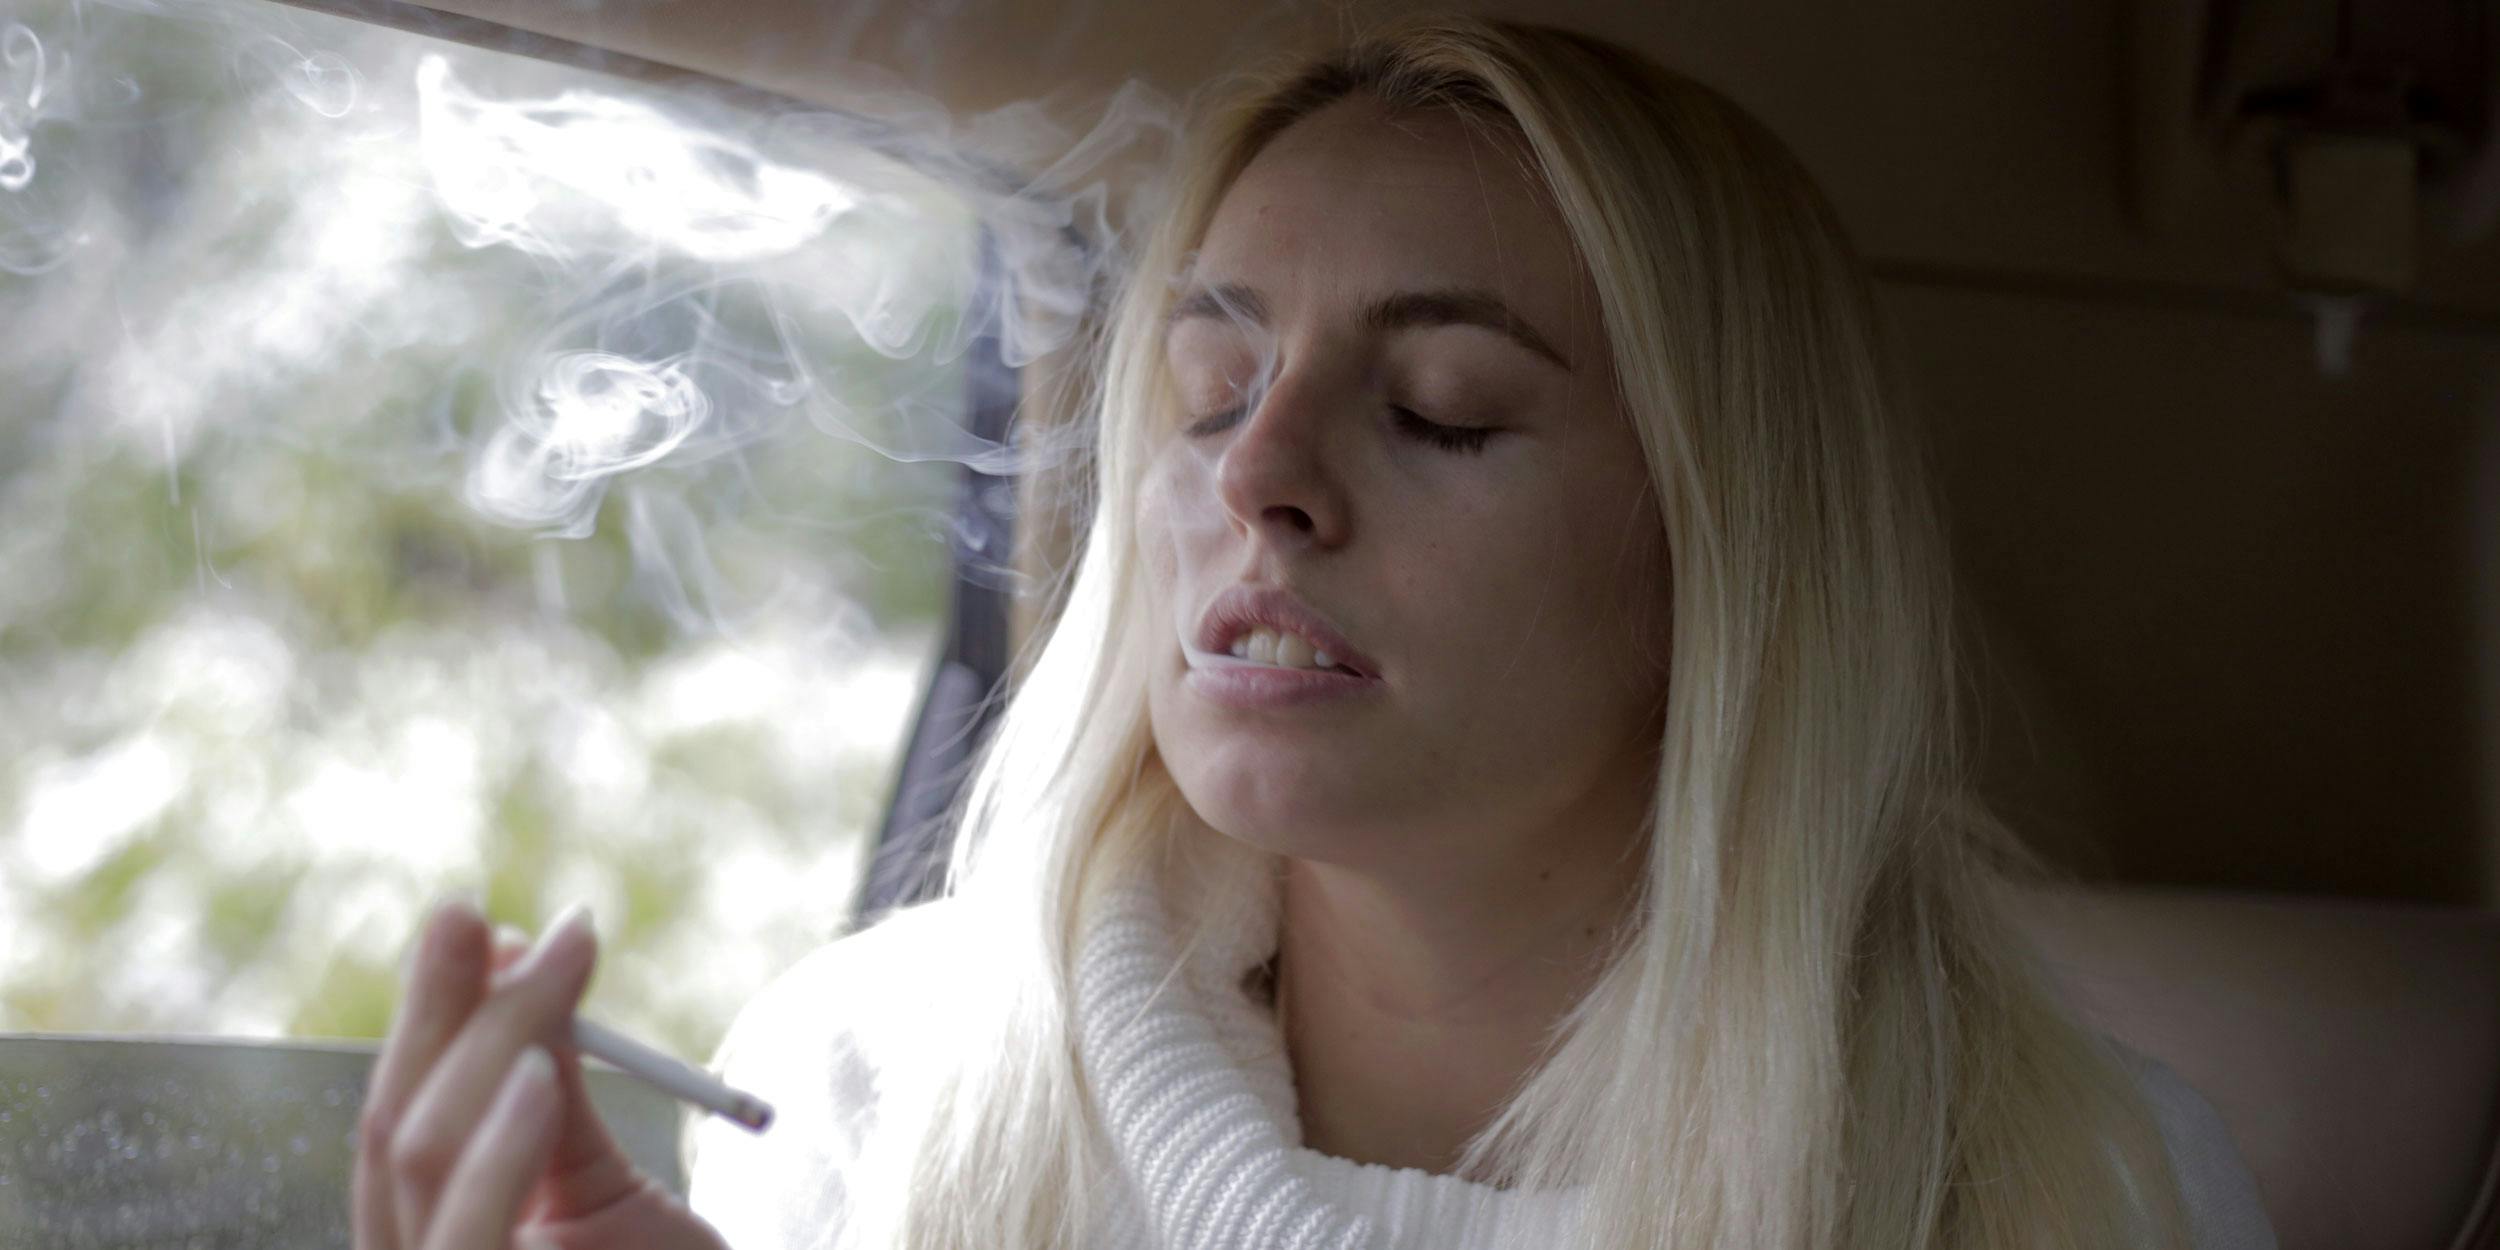 California is paying people to drive high for science. Here, a woman is shown in a car with a joint